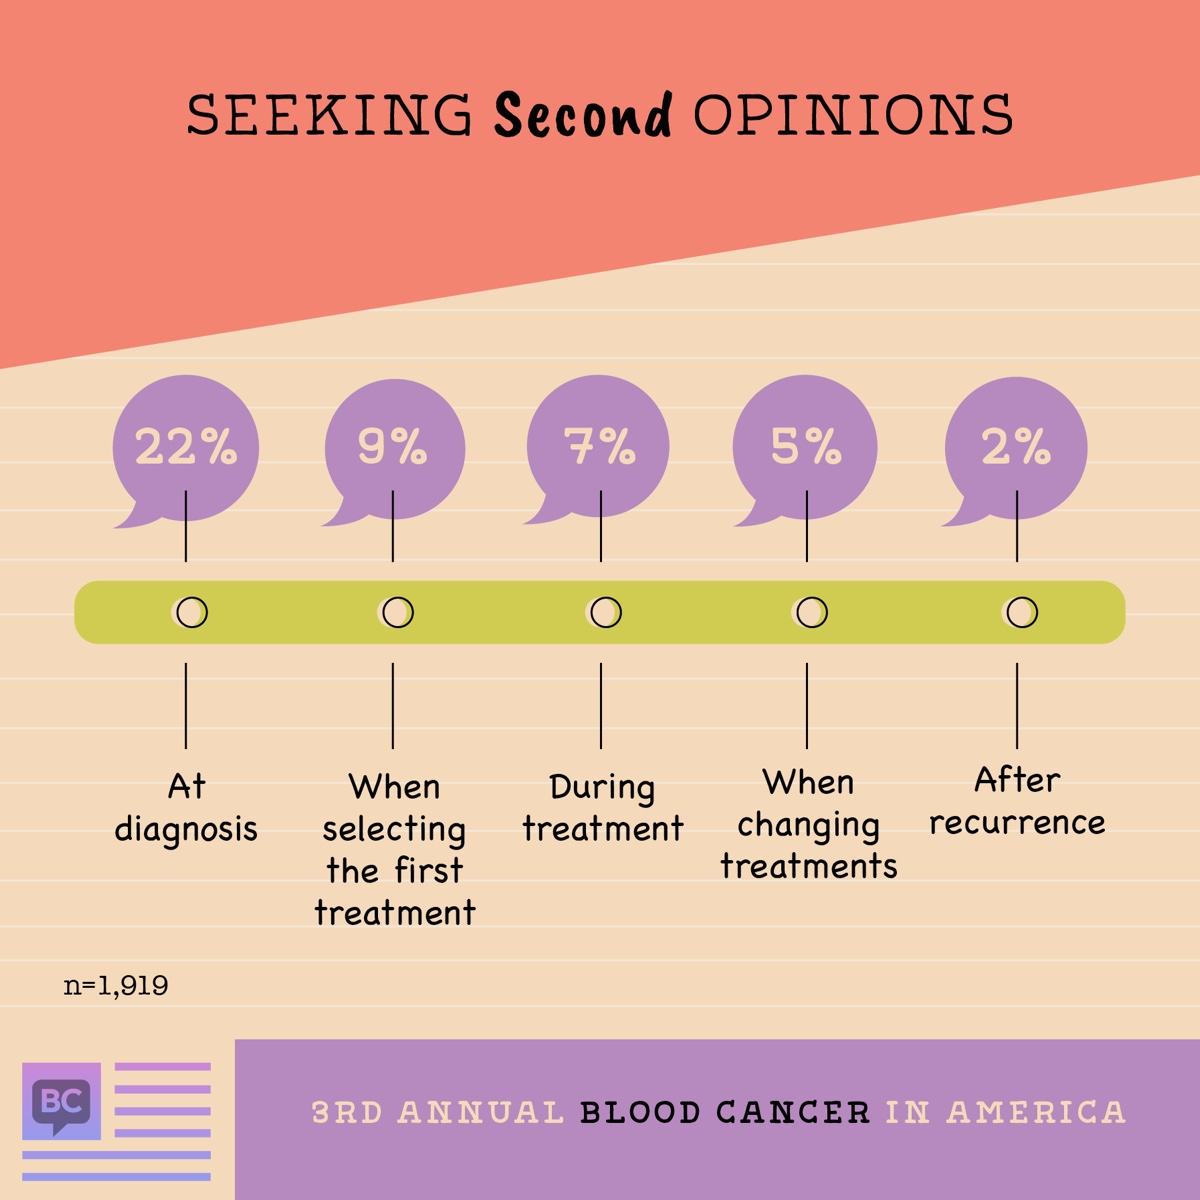 Survey respondents received second opinions at diagnosis (22%), when selecting first treatment (9%), during treatment (7%), when changing treatments (5%), after recurrence (2%)